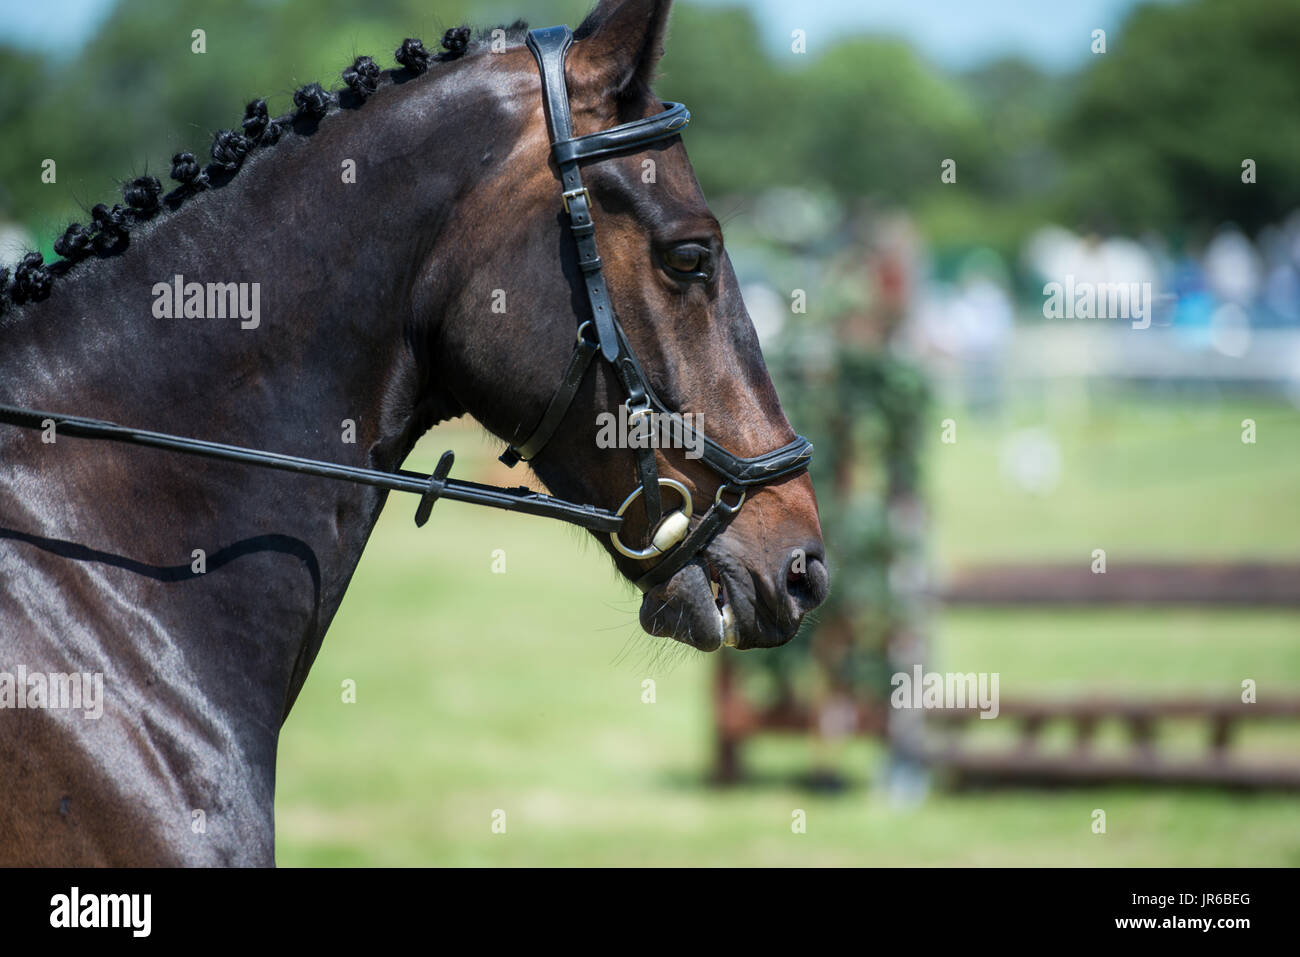 Close-up portrait of a horse at an equestrian event Stock Photo